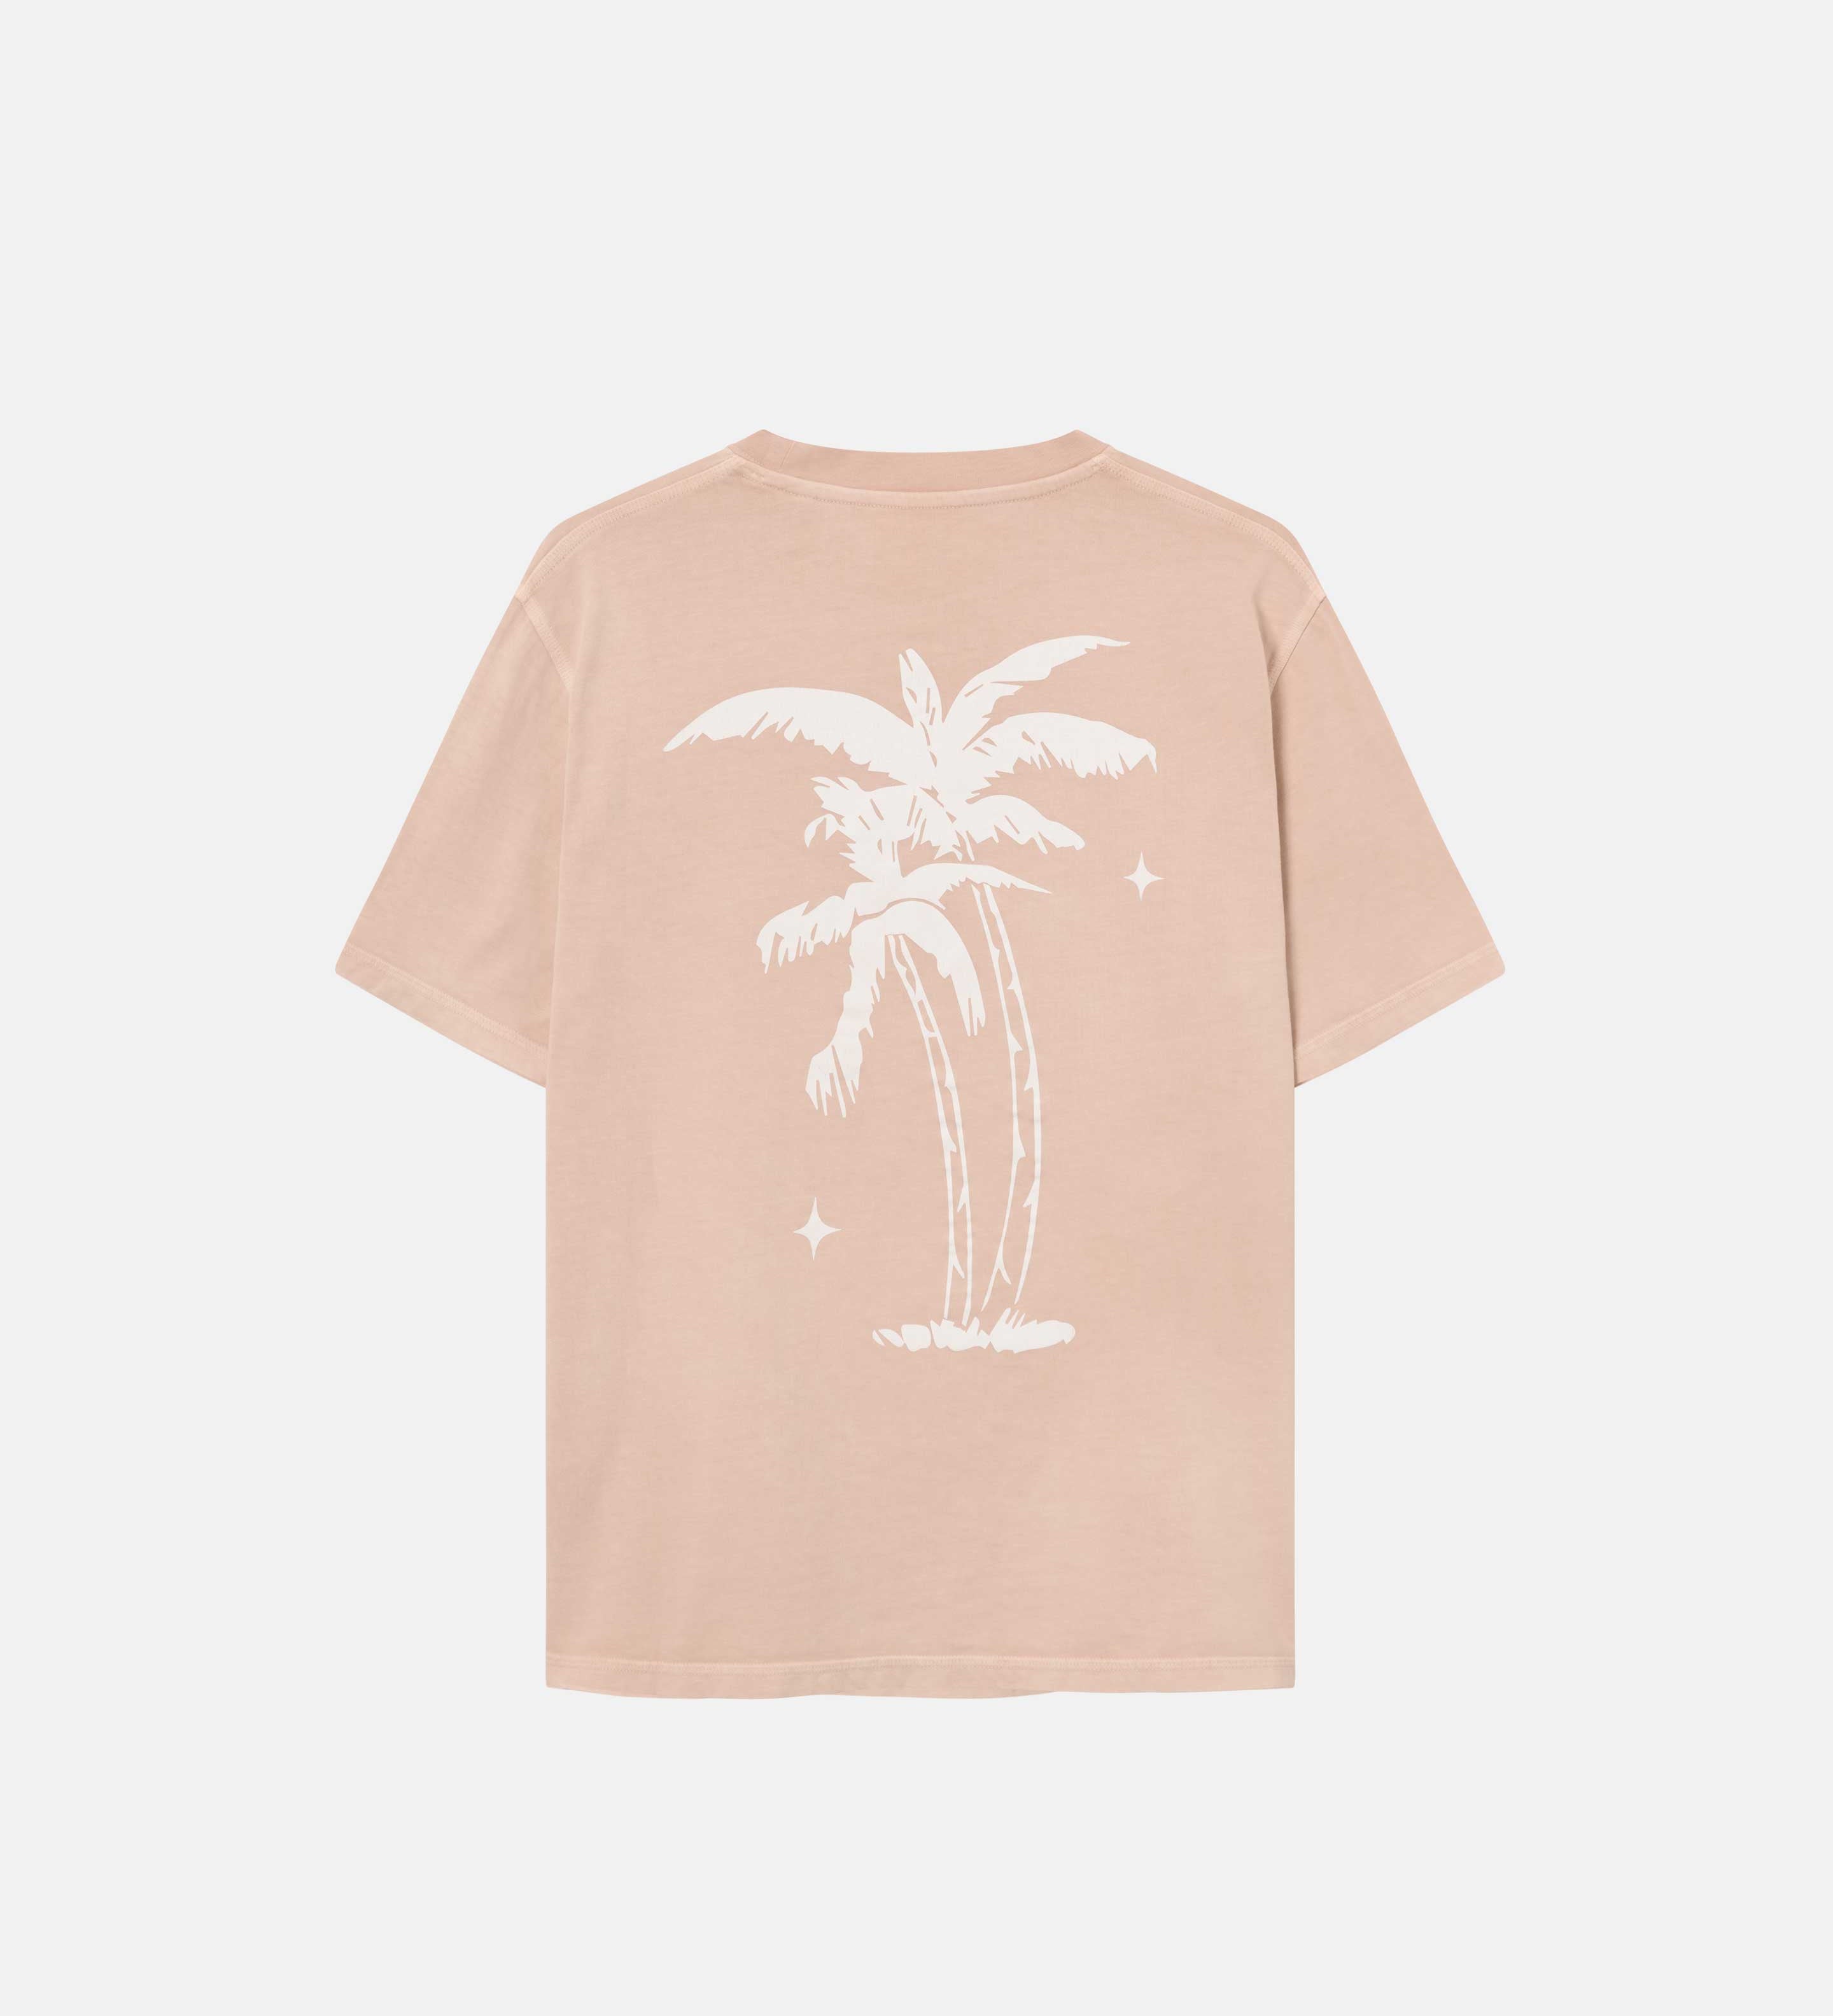 A sand colored t-shirt with palm print on its back